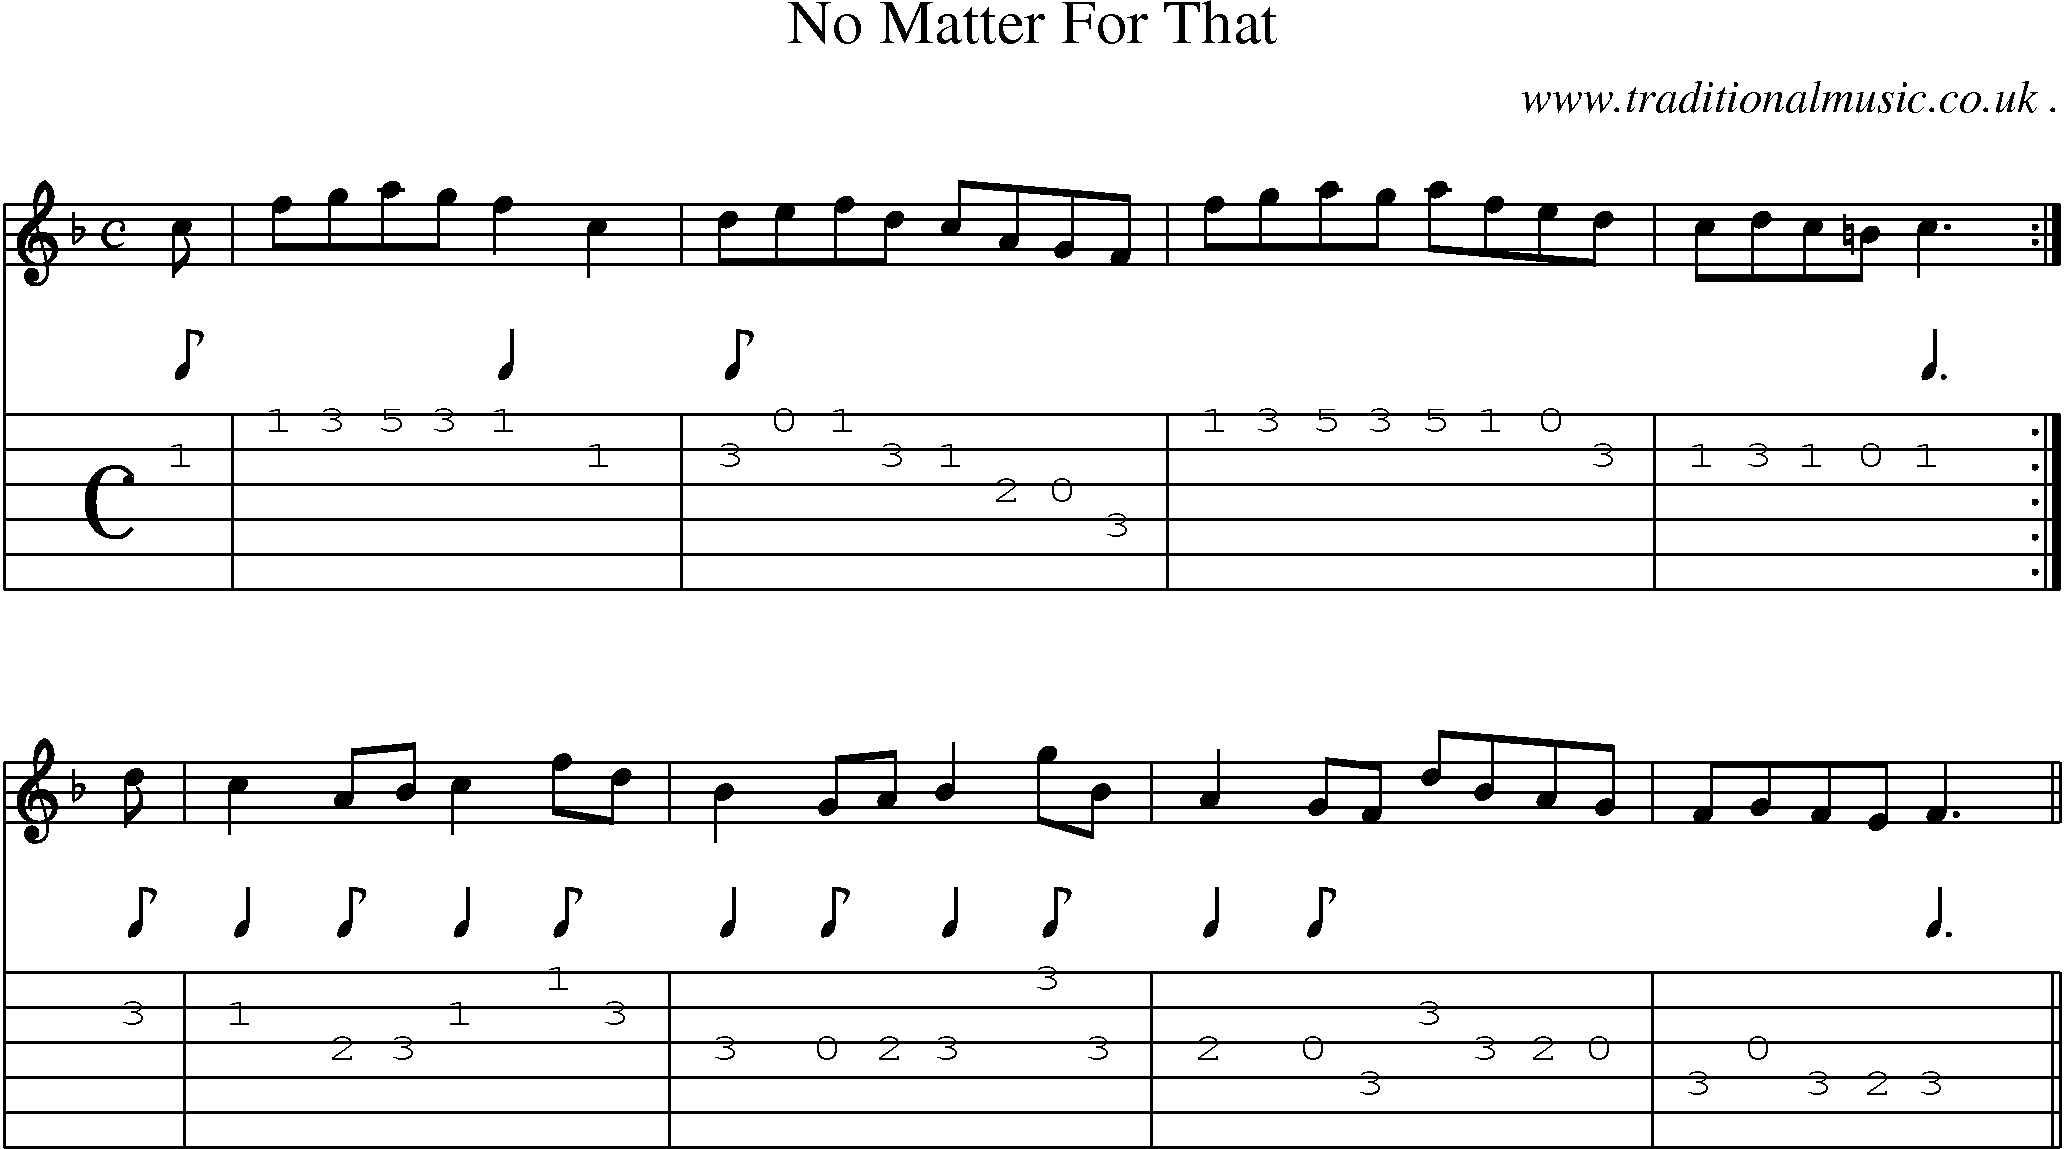 Sheet-Music and Guitar Tabs for No Matter For That